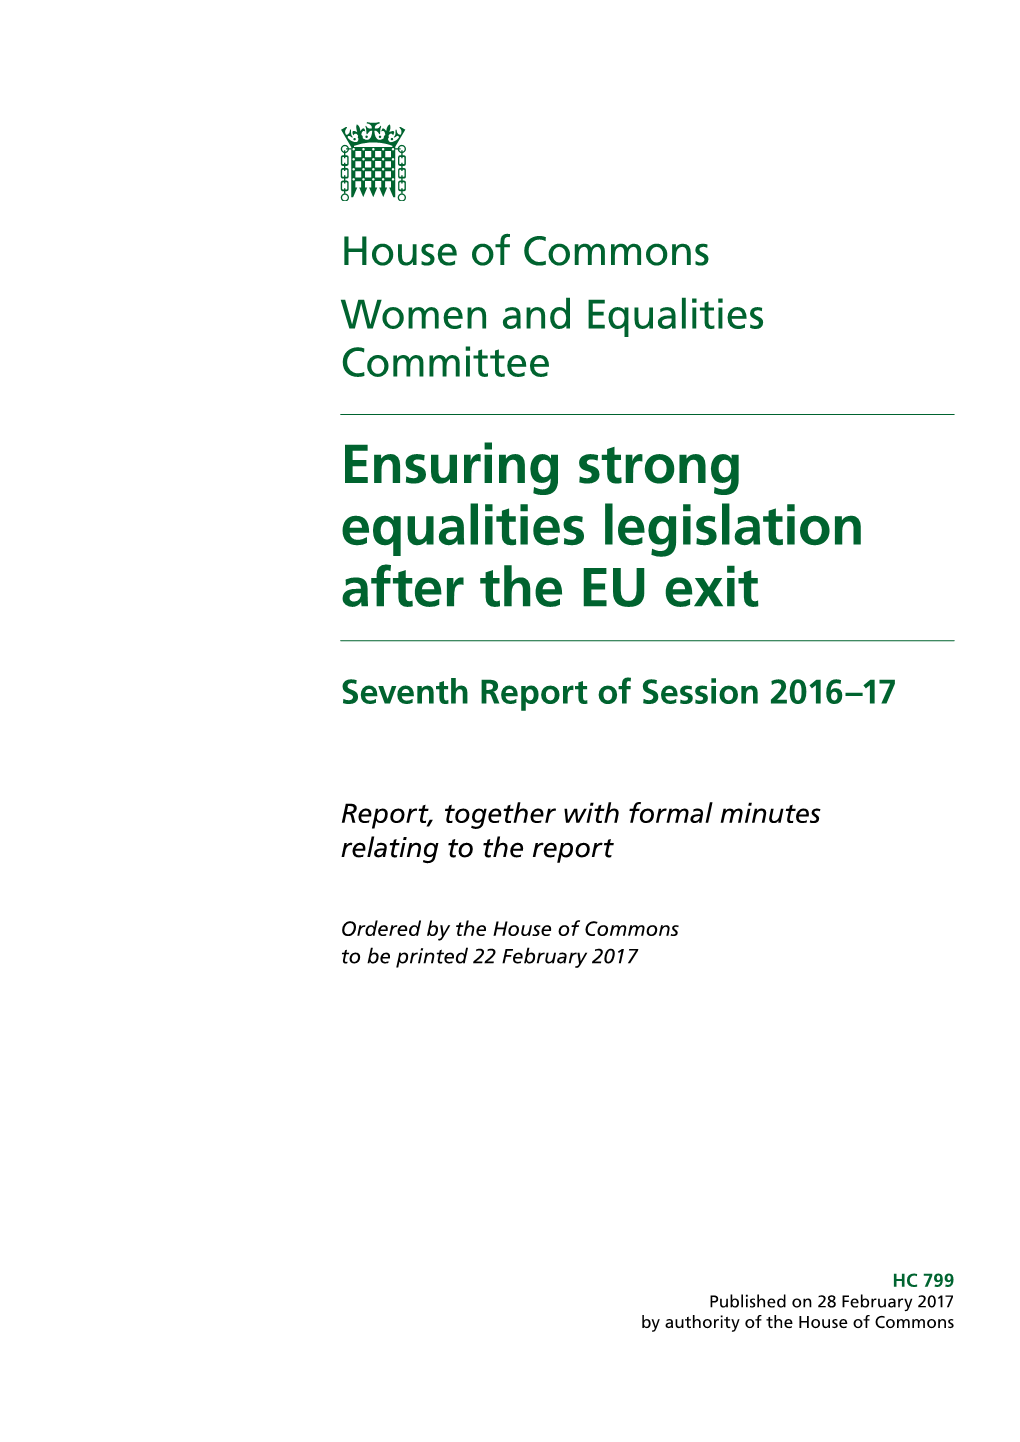 Ensuring Strong Equalities Legislation After the EU Exit Report